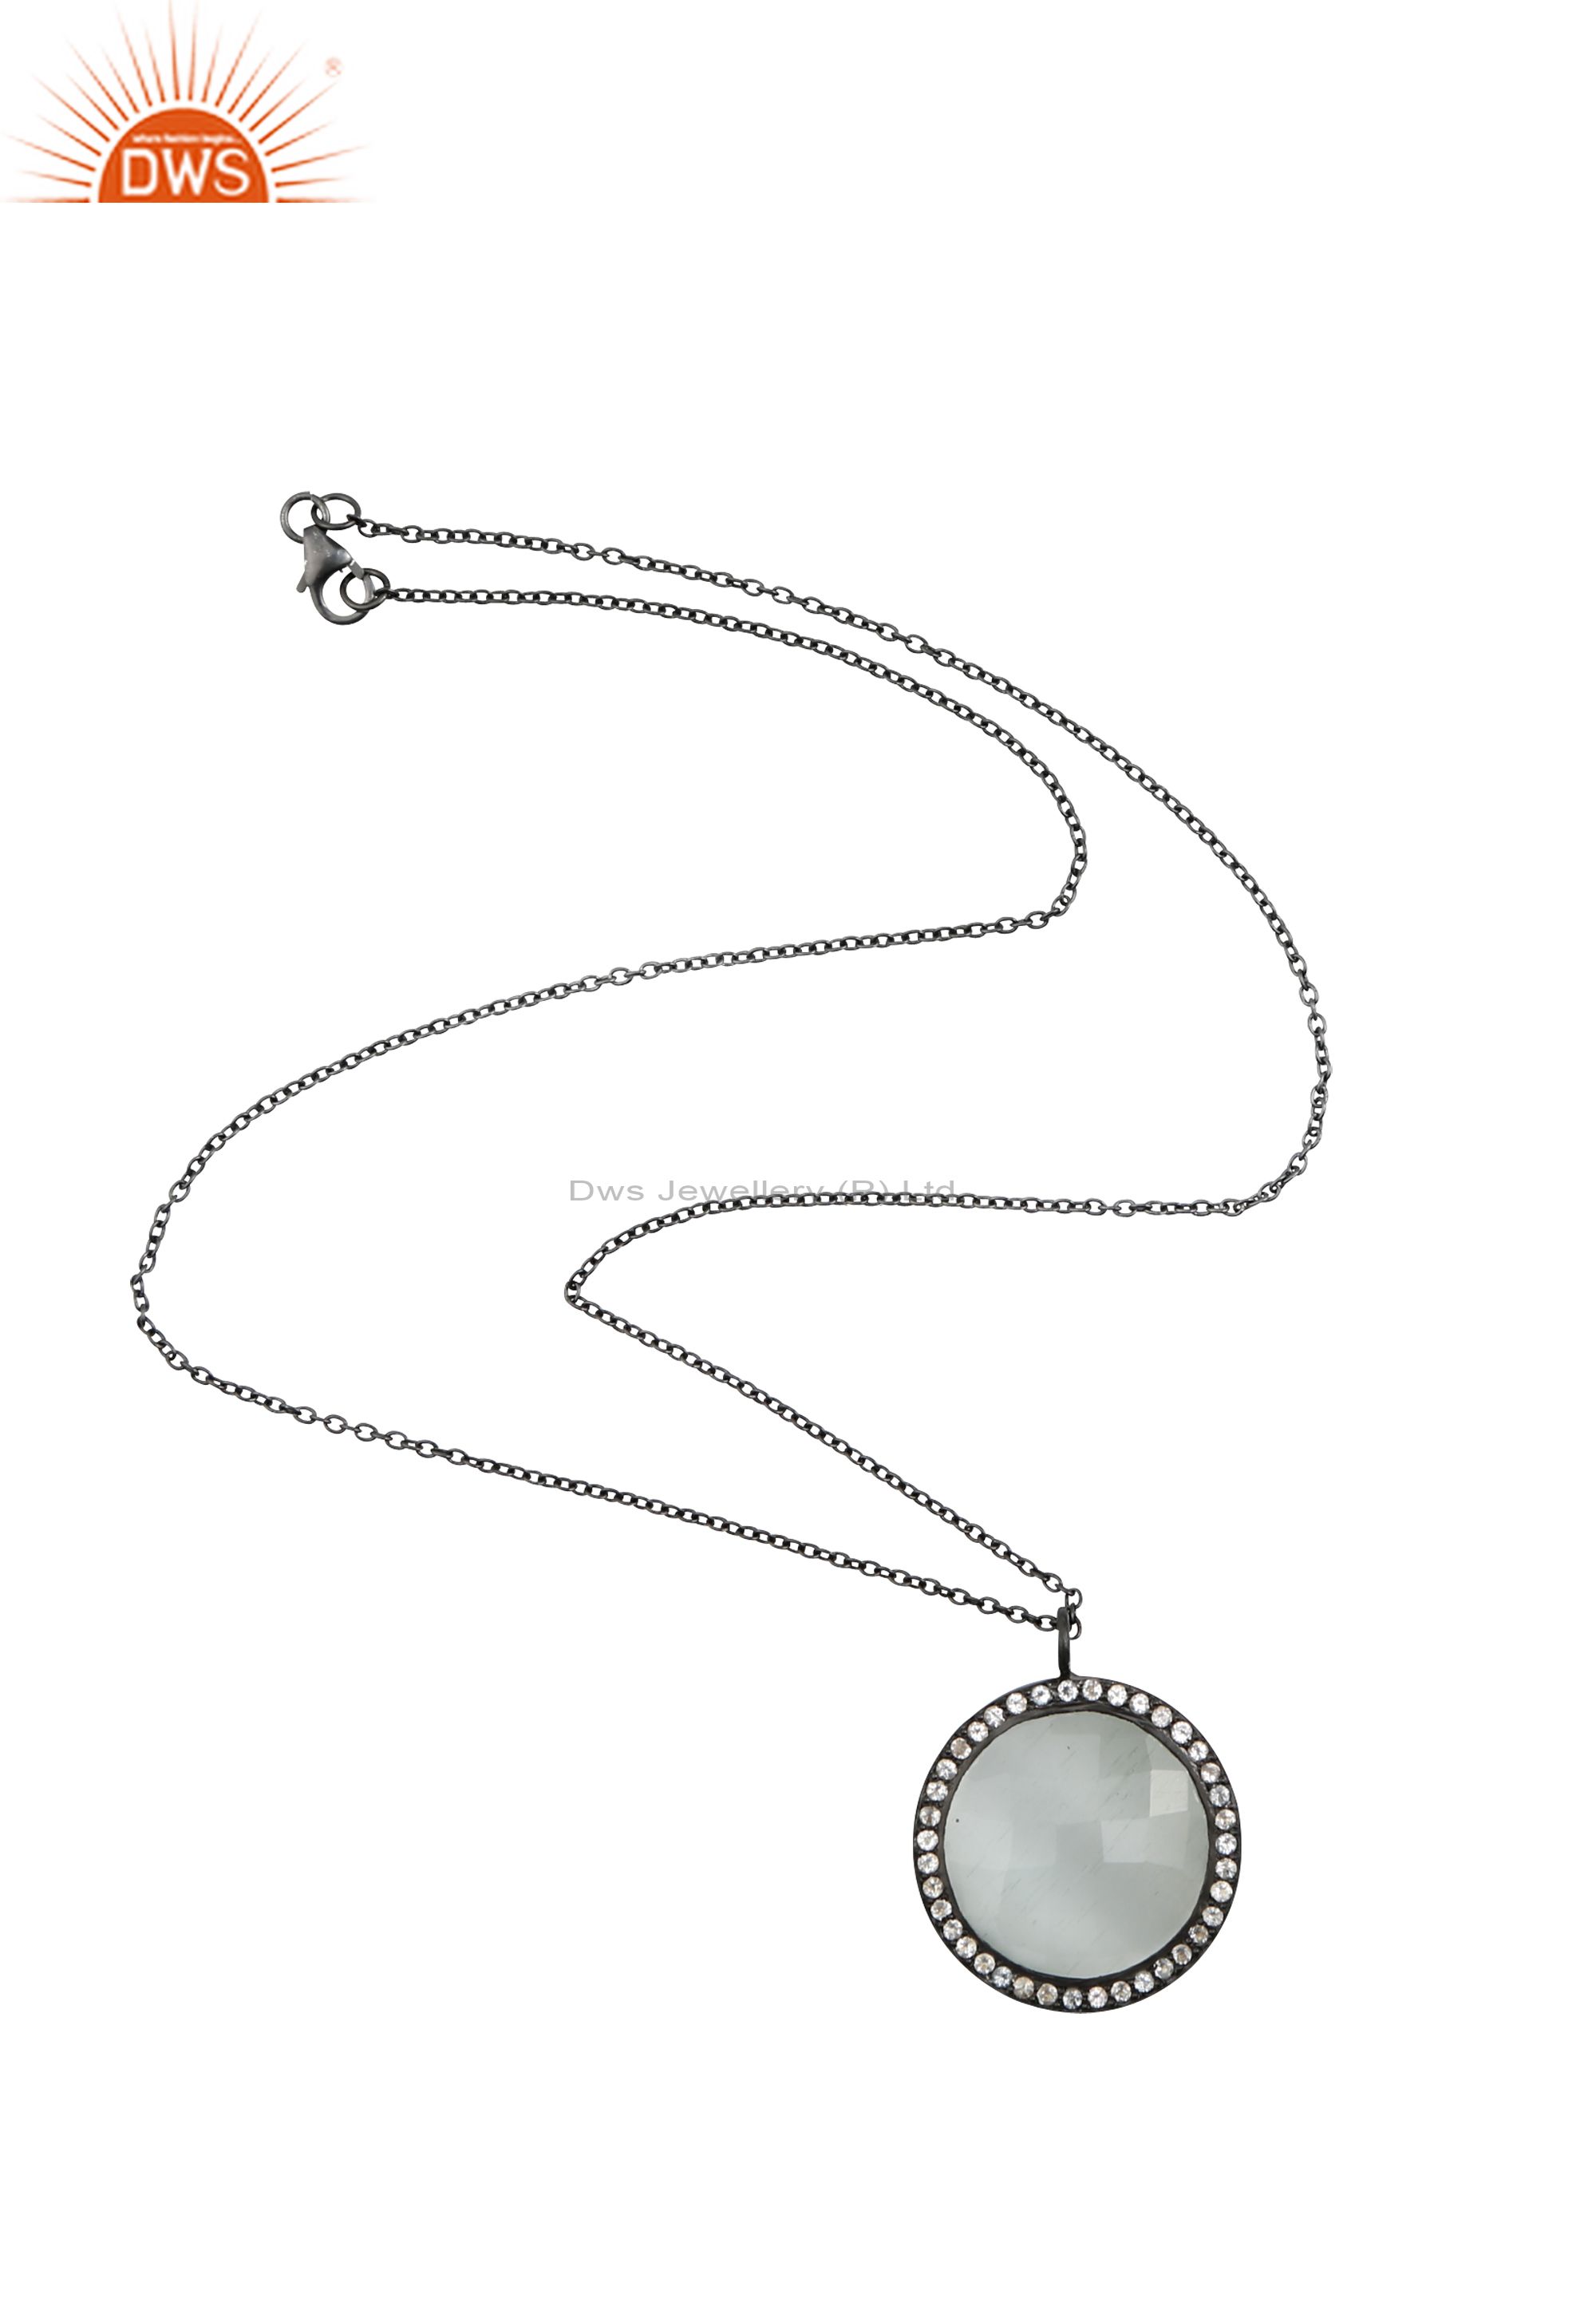 Oxidized sterling silver white moonstone and white topaz pendant with chain